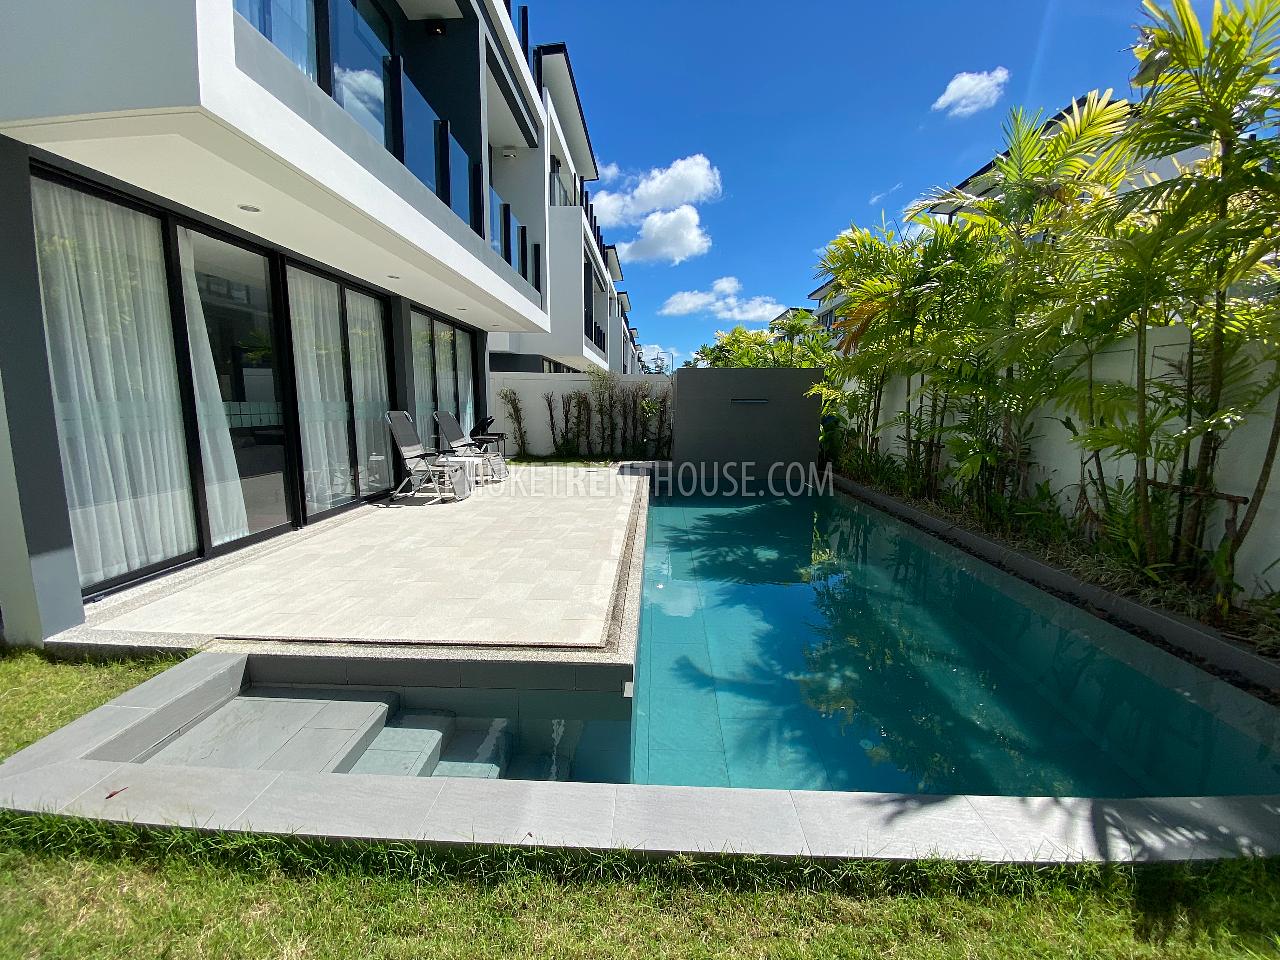 BAN21600: Family House In Laguna For Rent. Photo #1